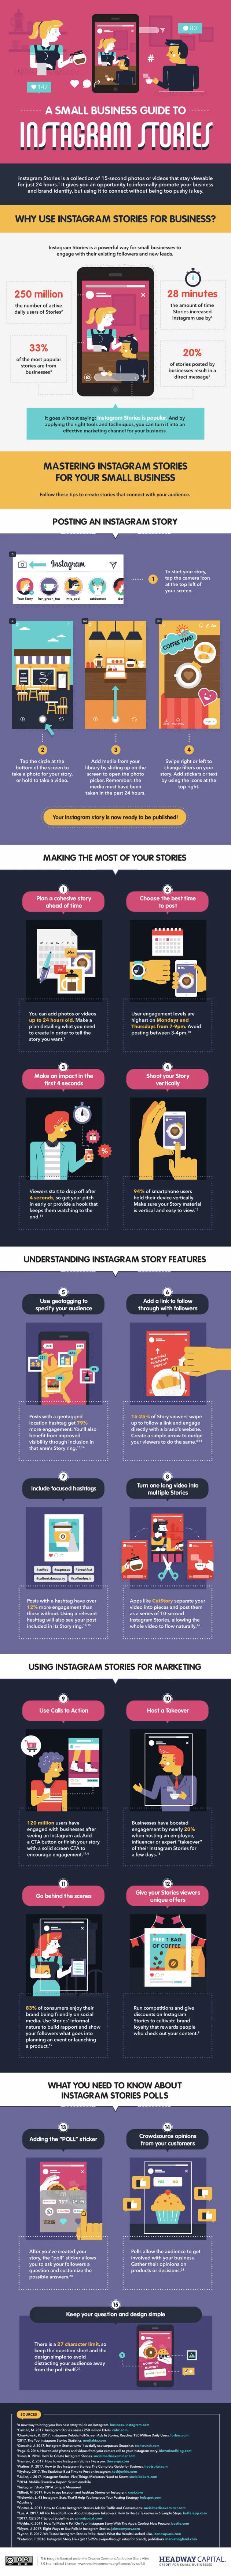 Instagram Stories guide for SMBs